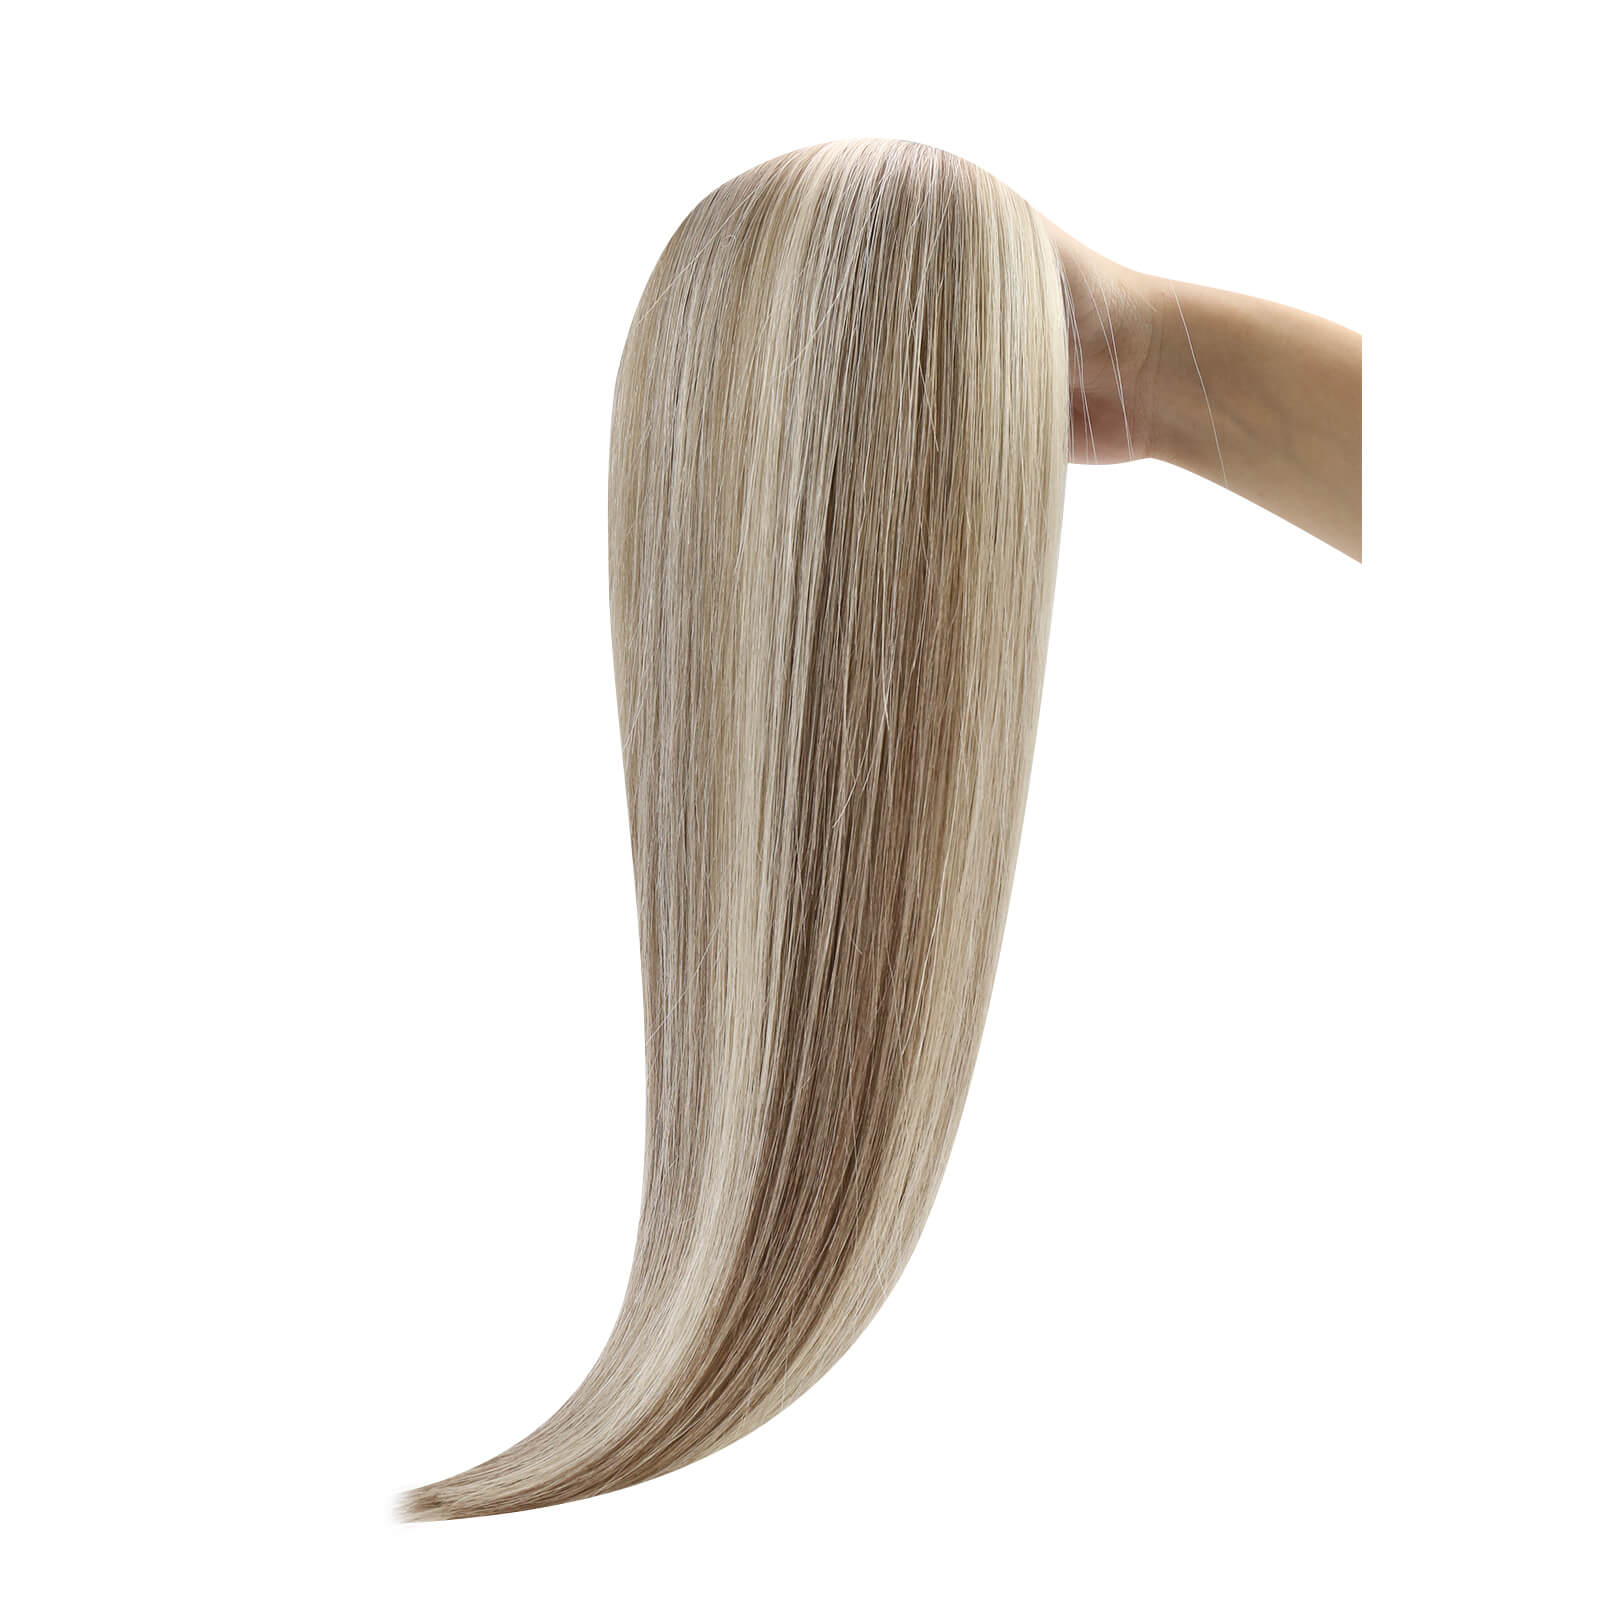 high quality tape in hair extensions brazilian tape in hair extensions